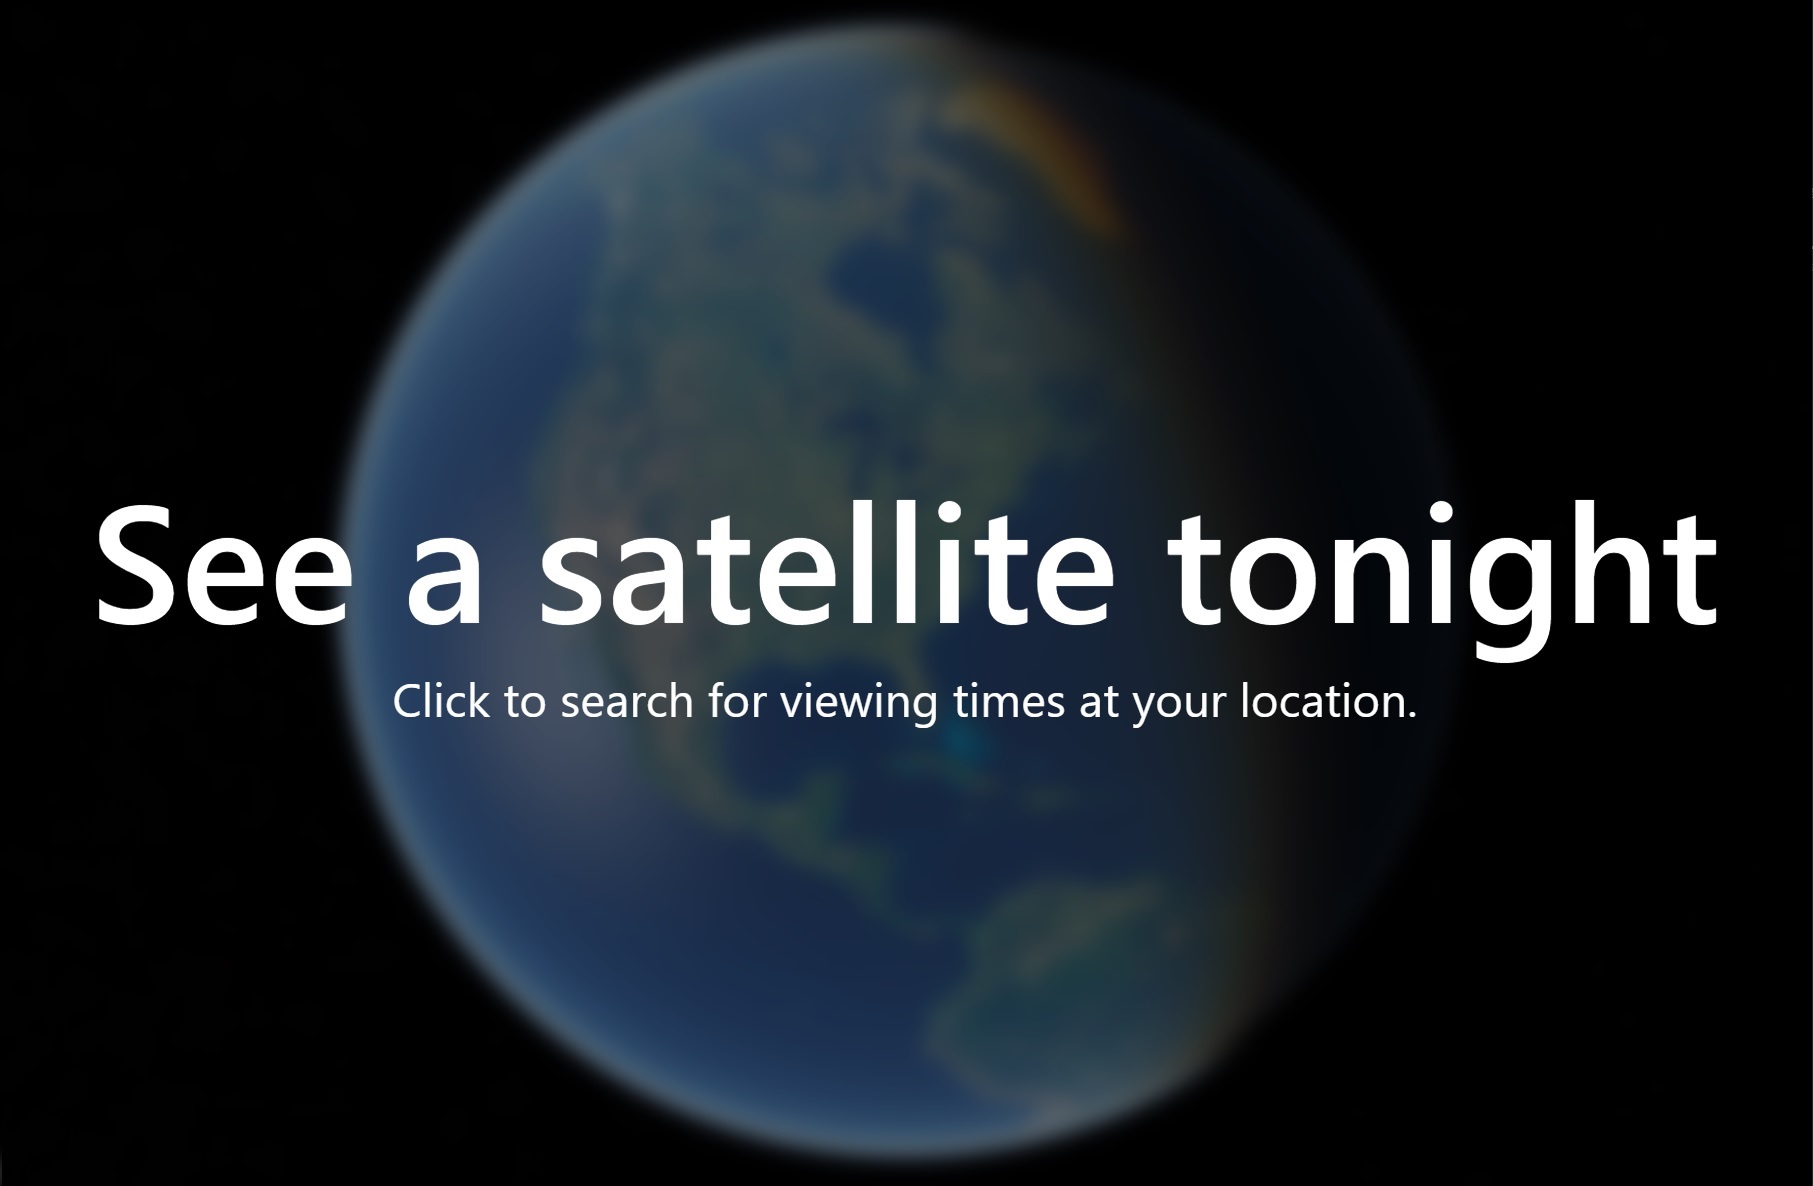 The front page of See A Satellite Tonight